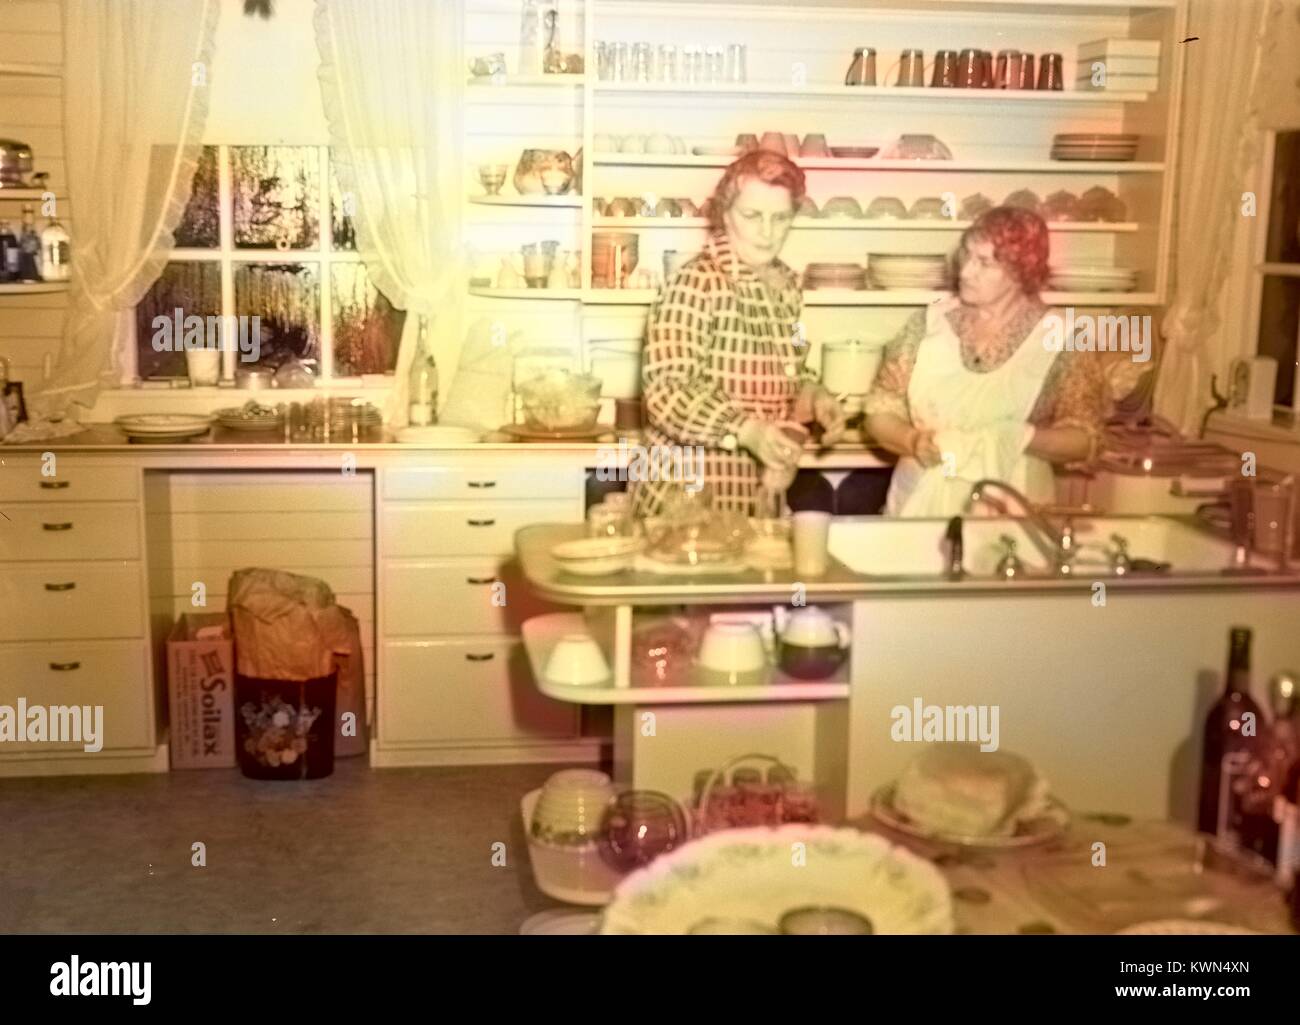 Two mature women cook in a suburban kitchen, with Soilax laundry detergent box visible, Eureka, California, 1950. Note: Image has been digitally colorized using a modern process. Colors may not be period-accurate. Stock Photo